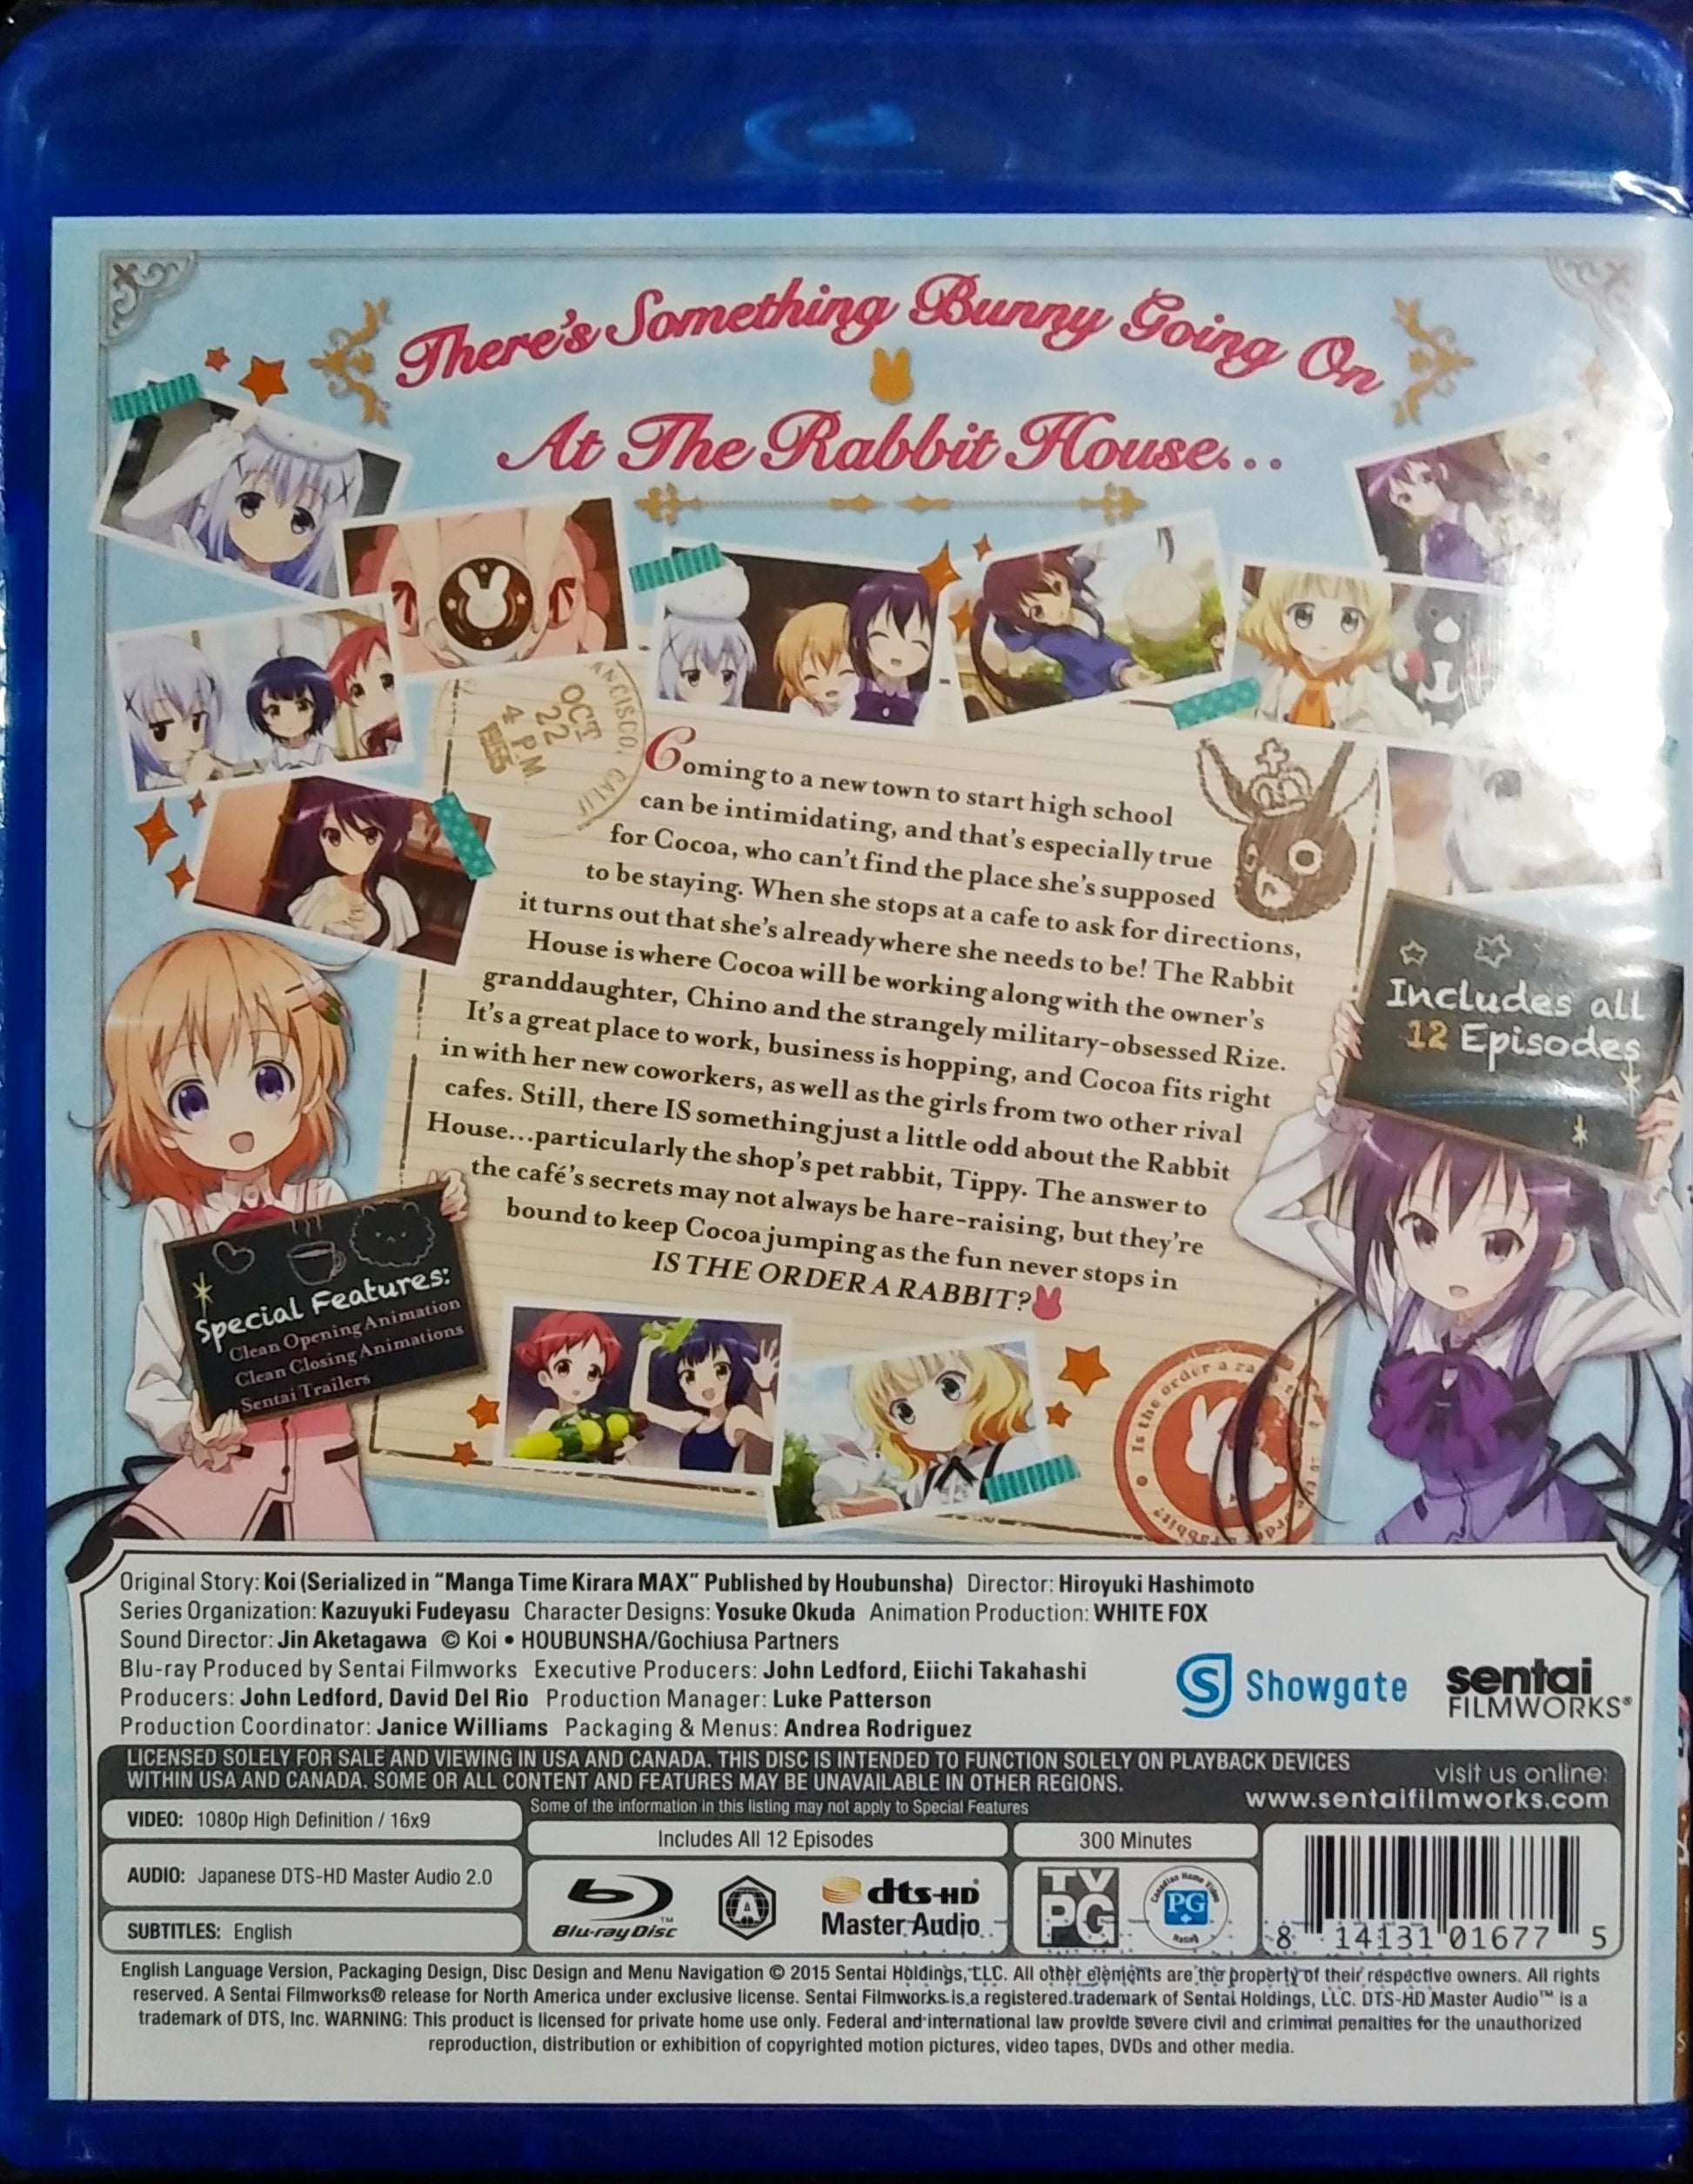 Is the Order a Rabbit? Season 2 Complete Collection - Blu-ray